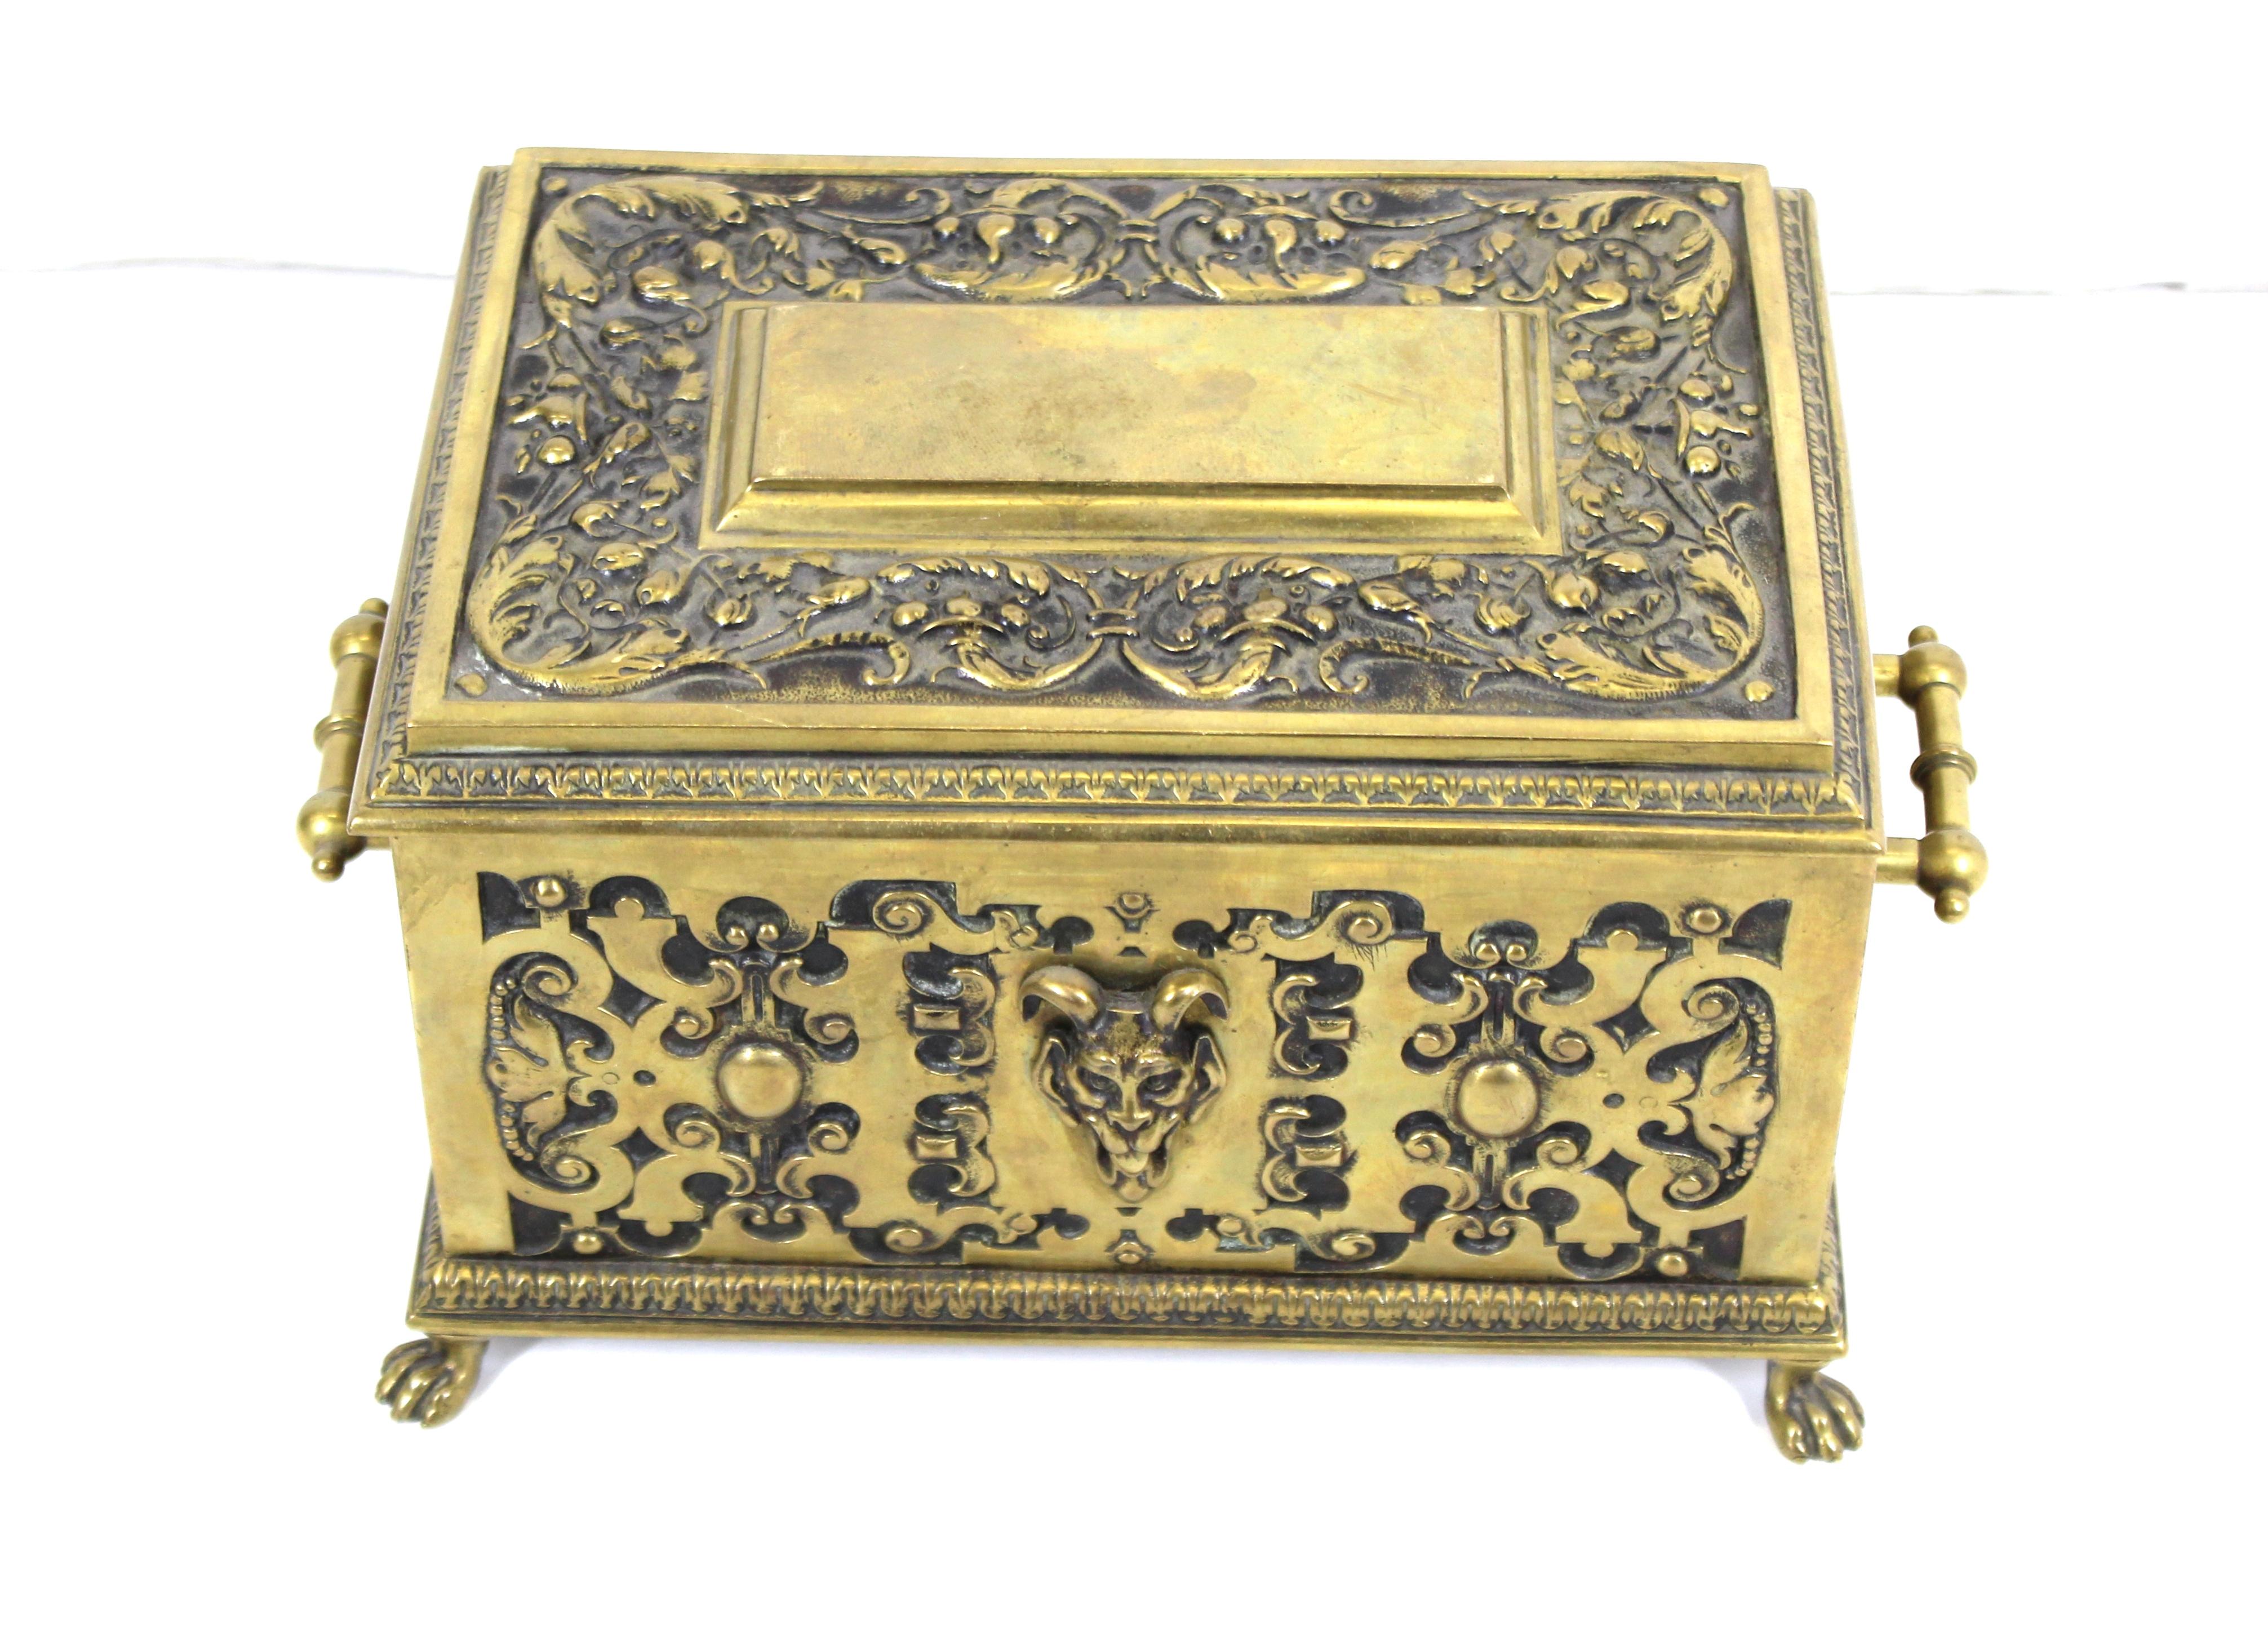 American Aesthetic Movement heavy cast bronze ornate casket humidor box. The piece has ornamental scroll-work and a grotesque head on the front and the back side. Interior walls are lined with cedar wood. Made in the United States during the 1870s,